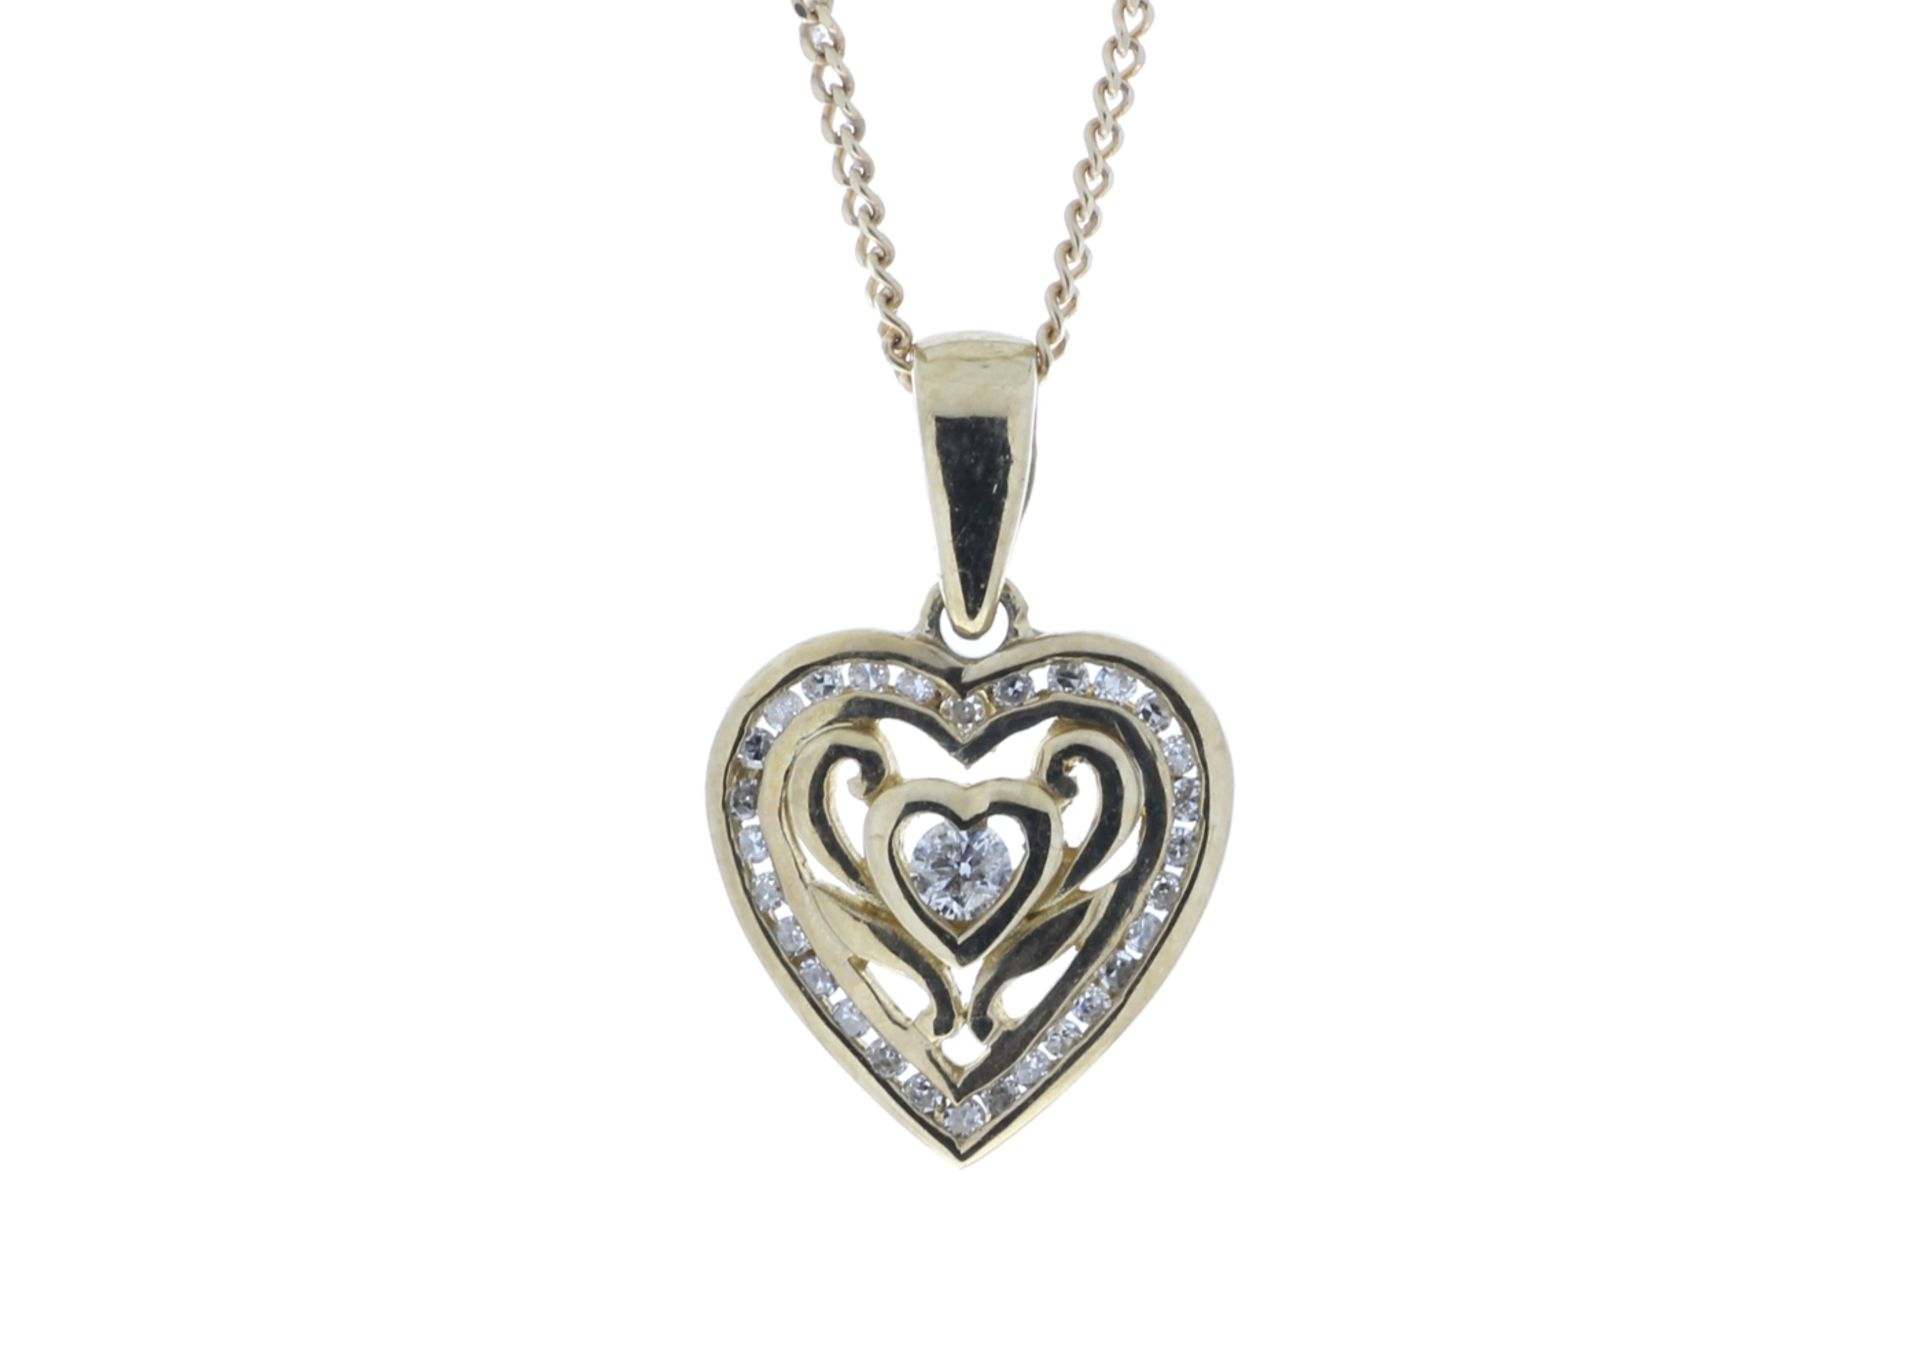 ***£1,740.00*** Certified by GIE 9ct Yellow Gold Heart Pendant Set With Diamonds With Centre Heart